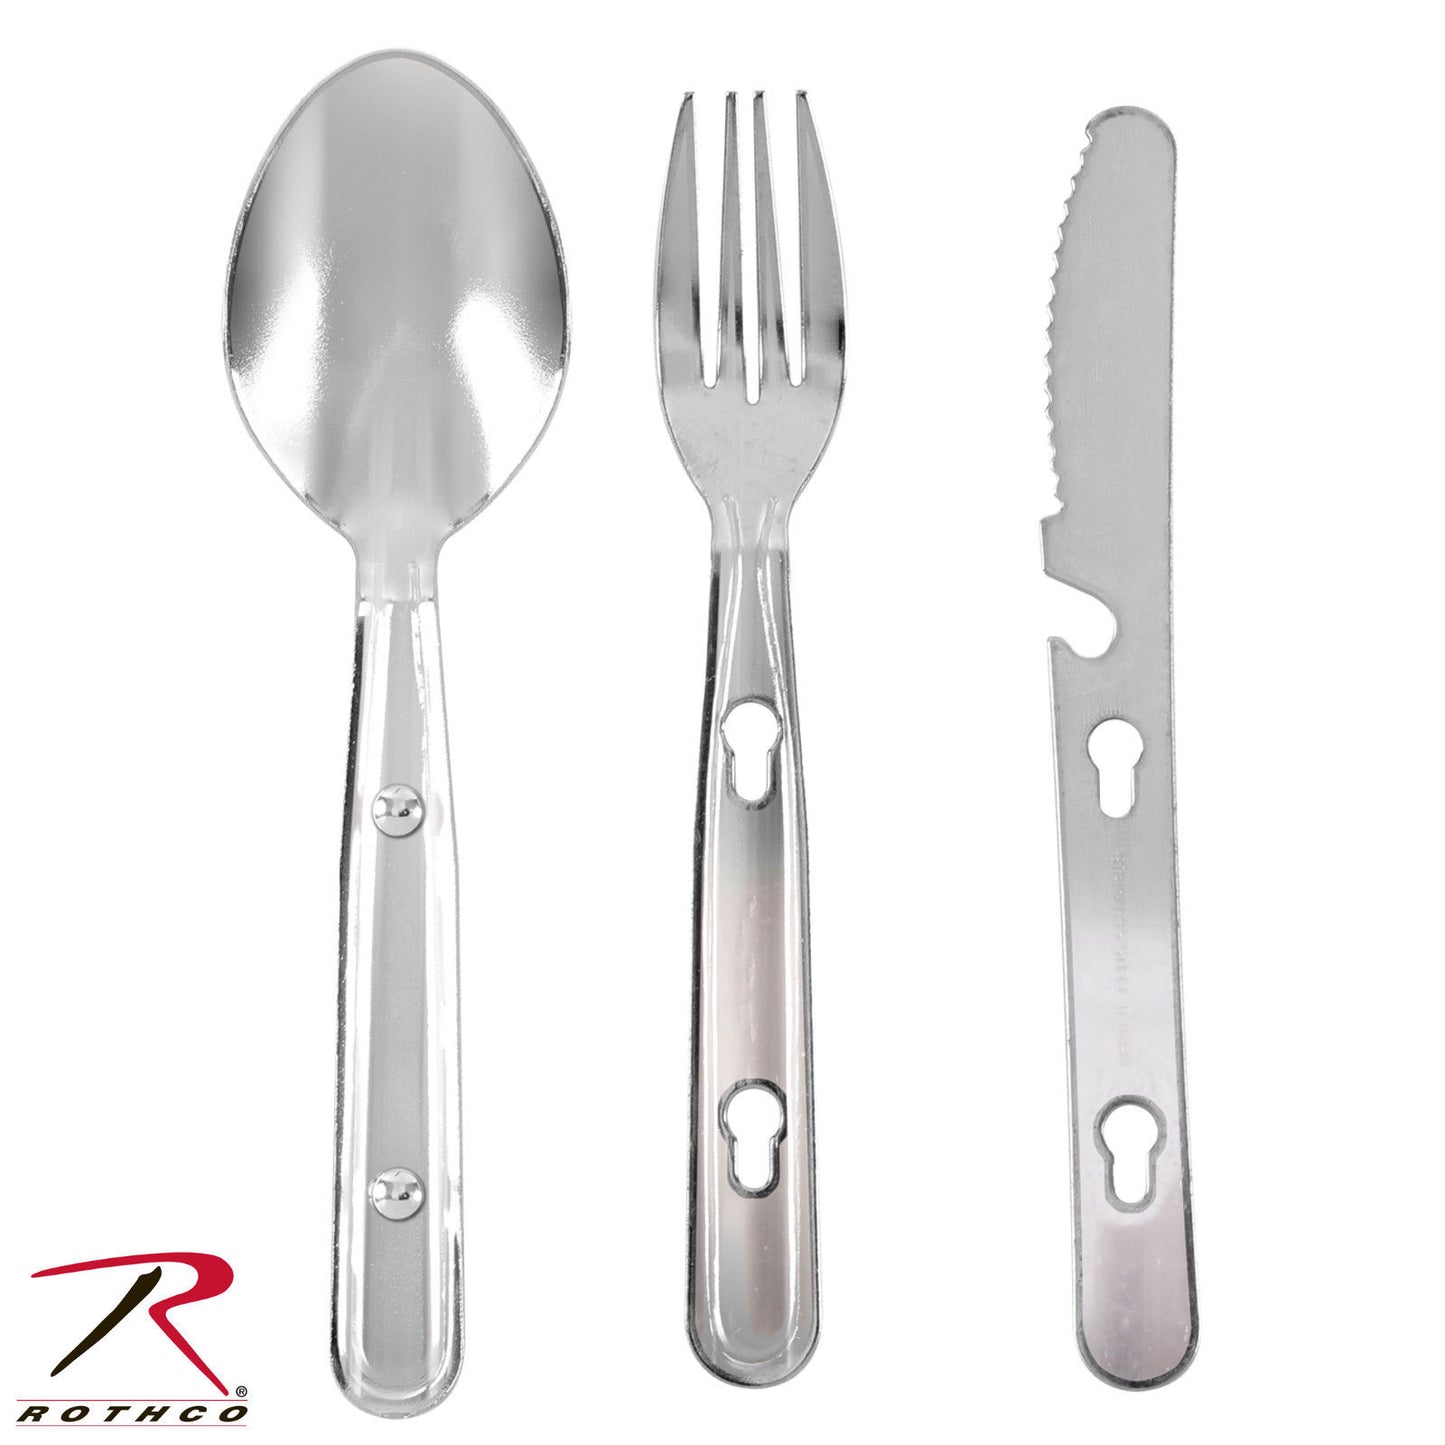 Rothco Chow Kit - 3 Piece Stainless Steel Knife, Fork & Spoon In A Locking Set